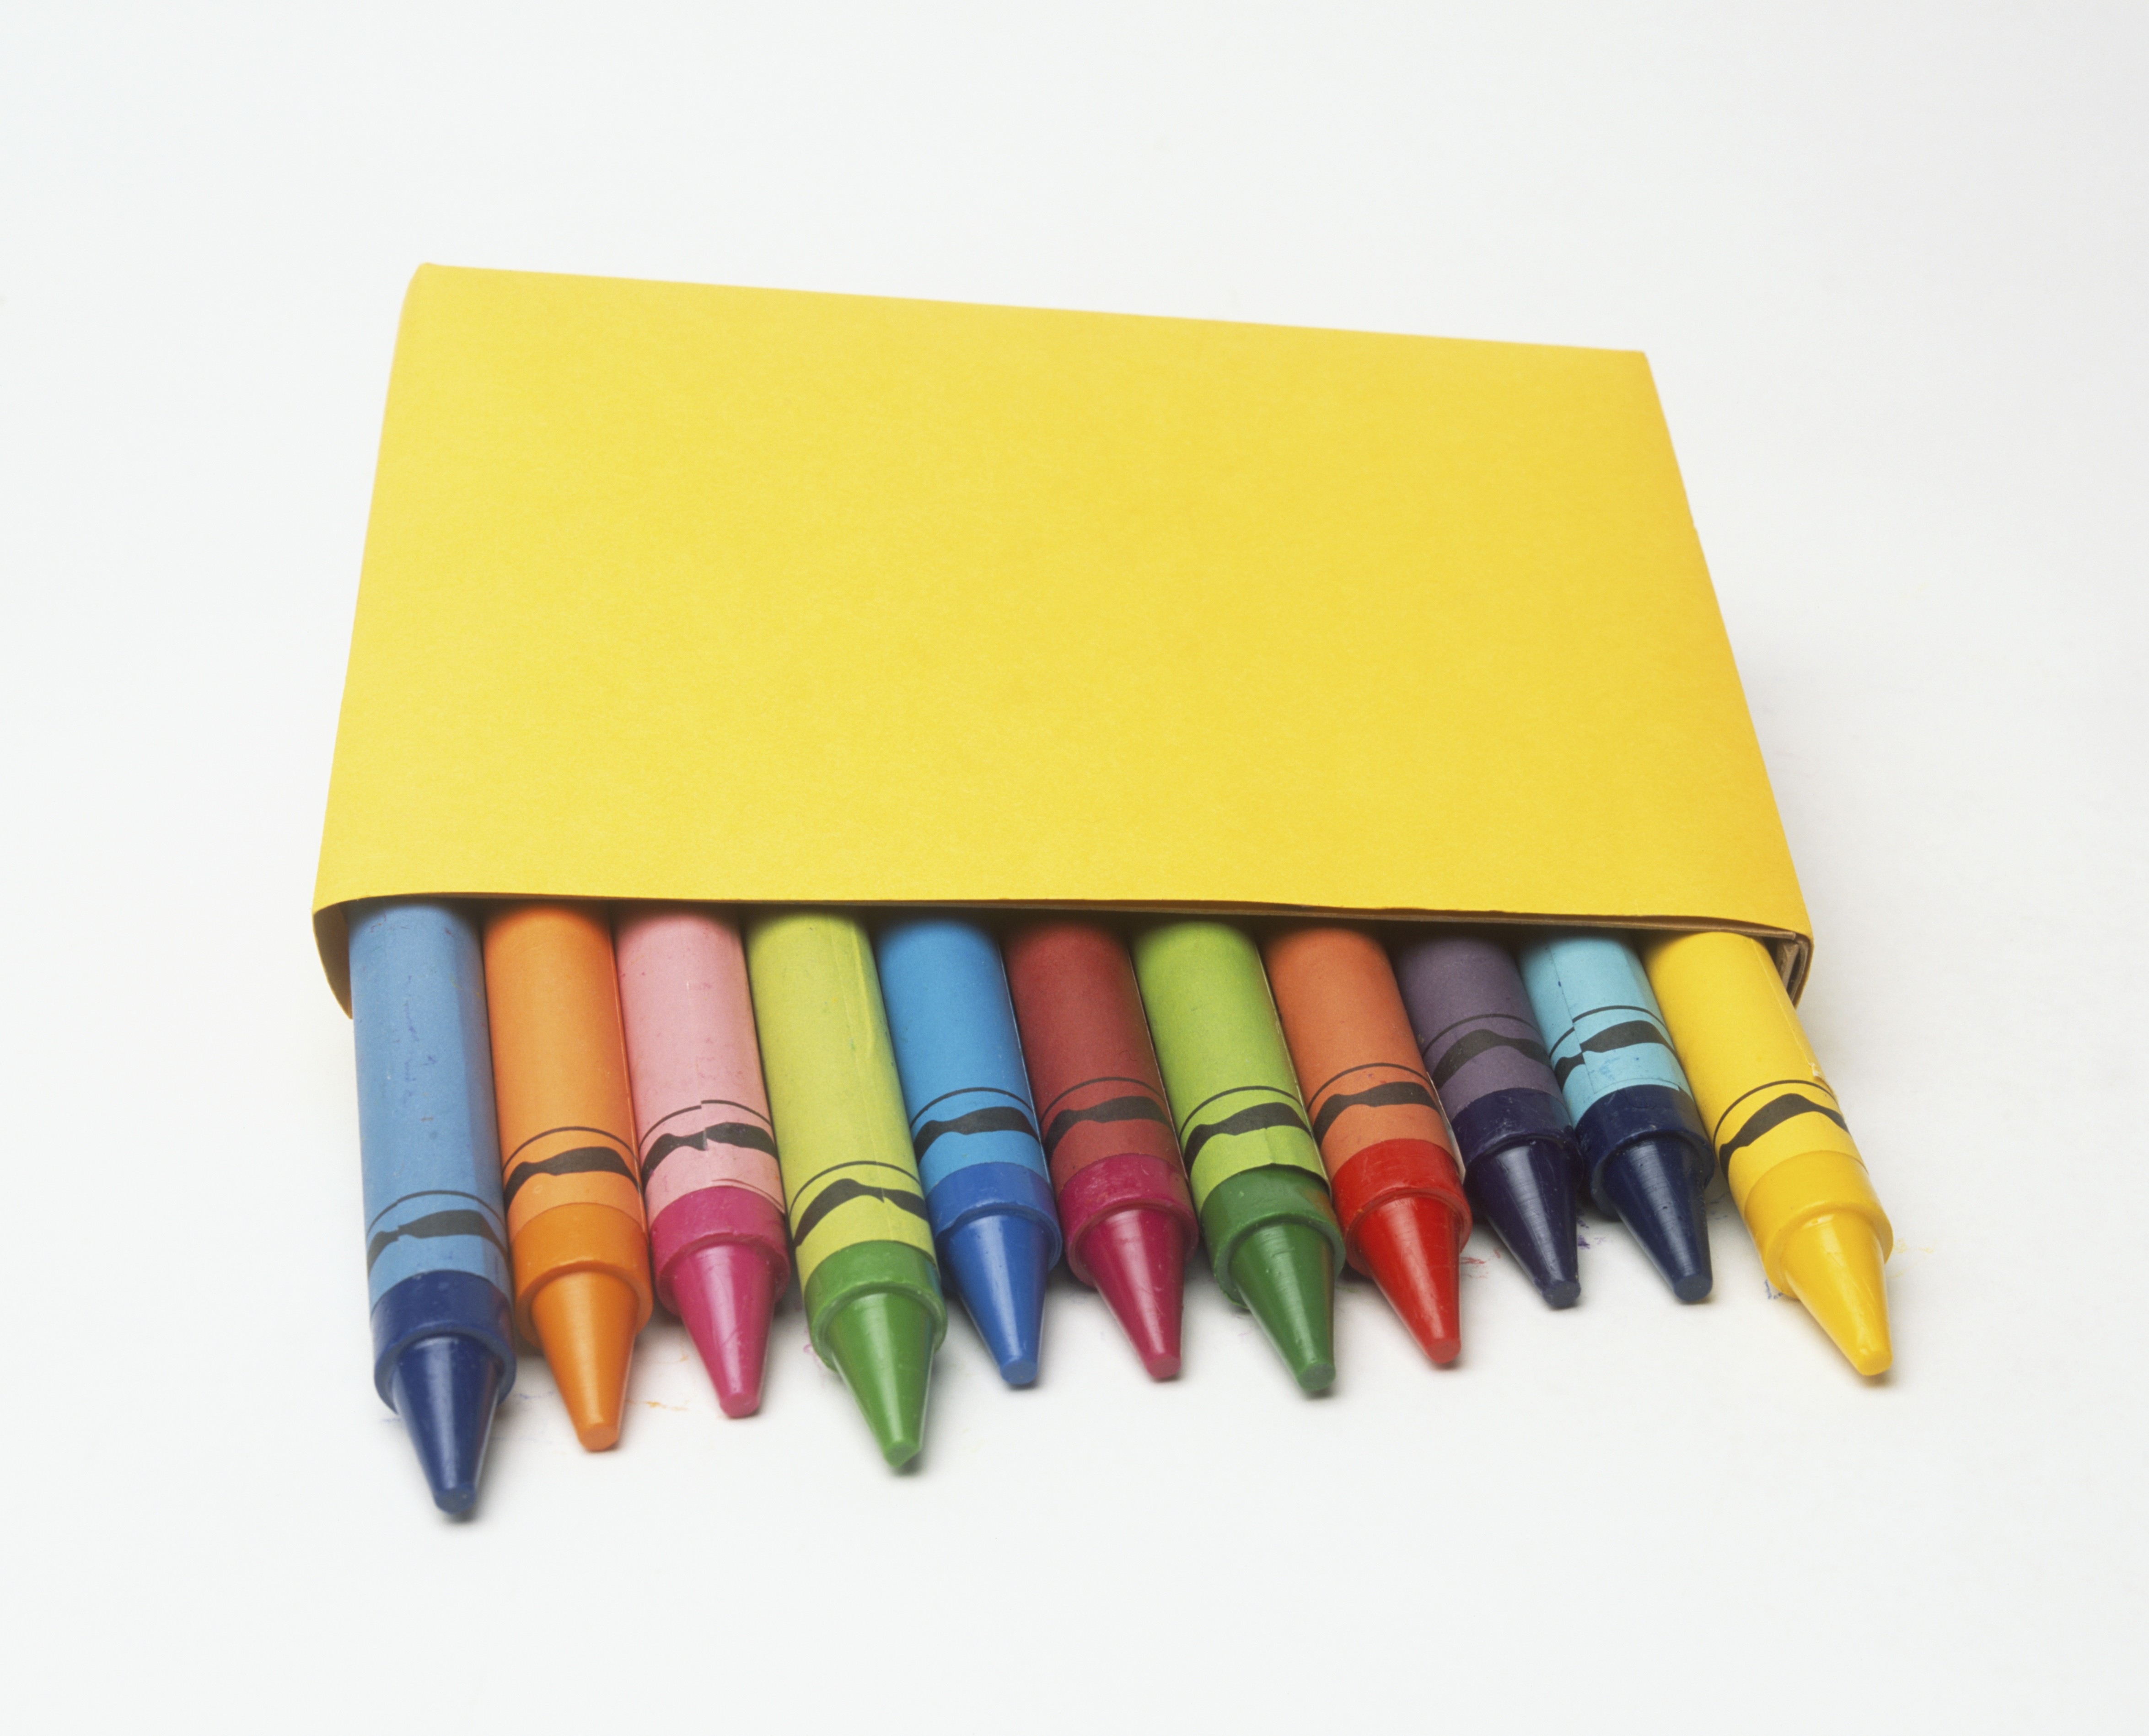 Tips of coloured crayons emerging from a yellow box, front view.